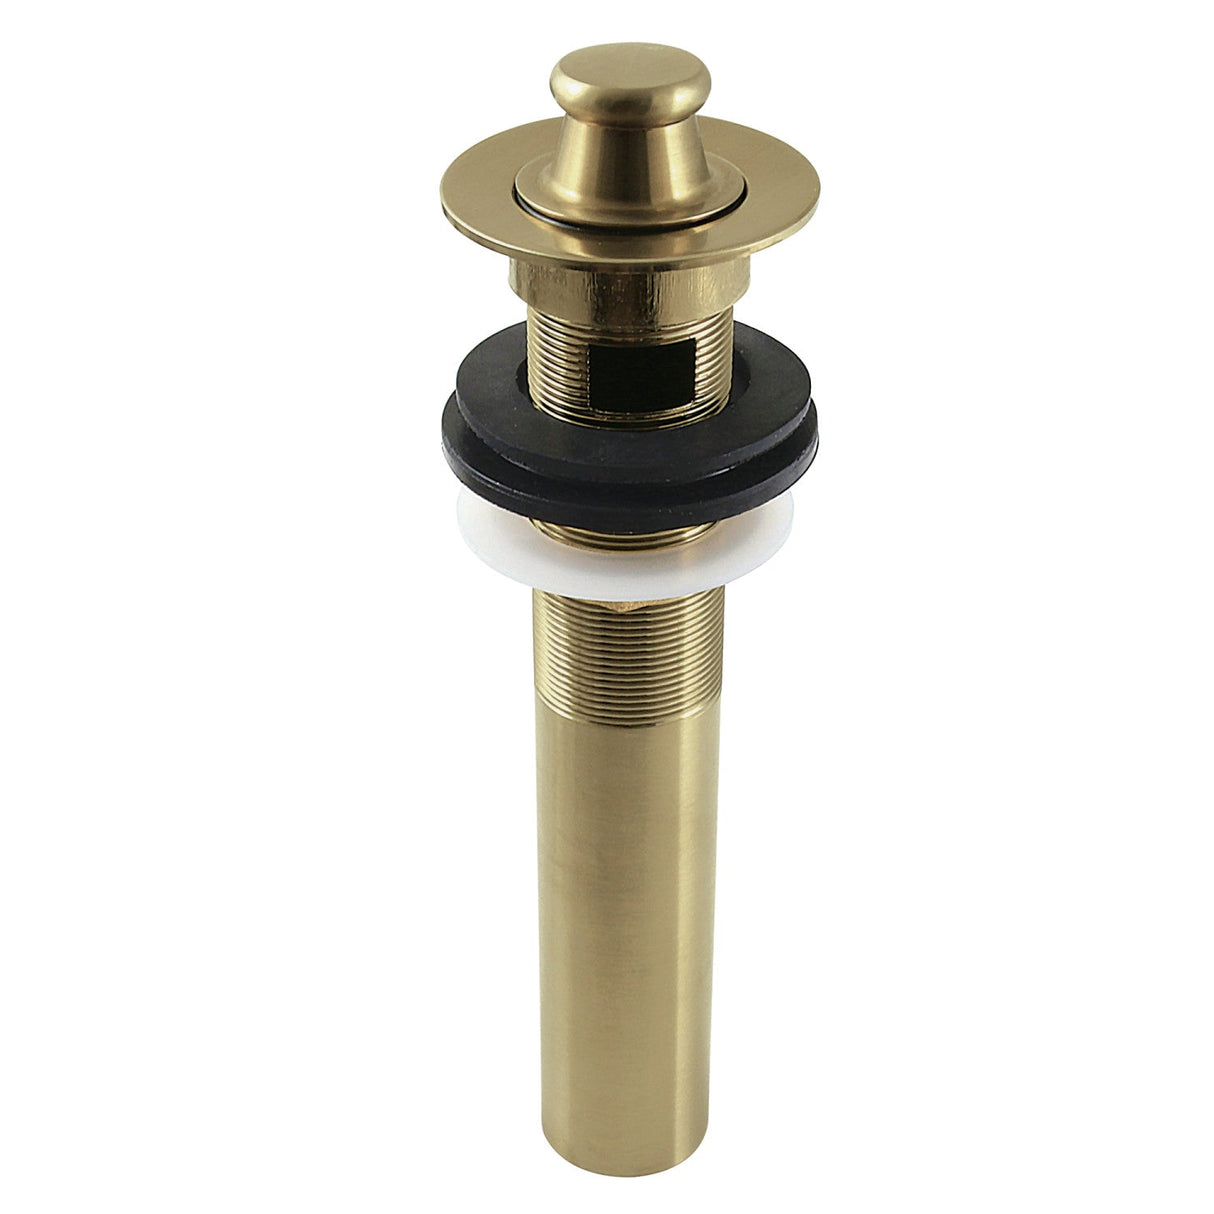 Fauceture KB3007 Brass Lift and Turn Bathroom Sink Drain with Overflow, 17 Gauge, Brushed Brass